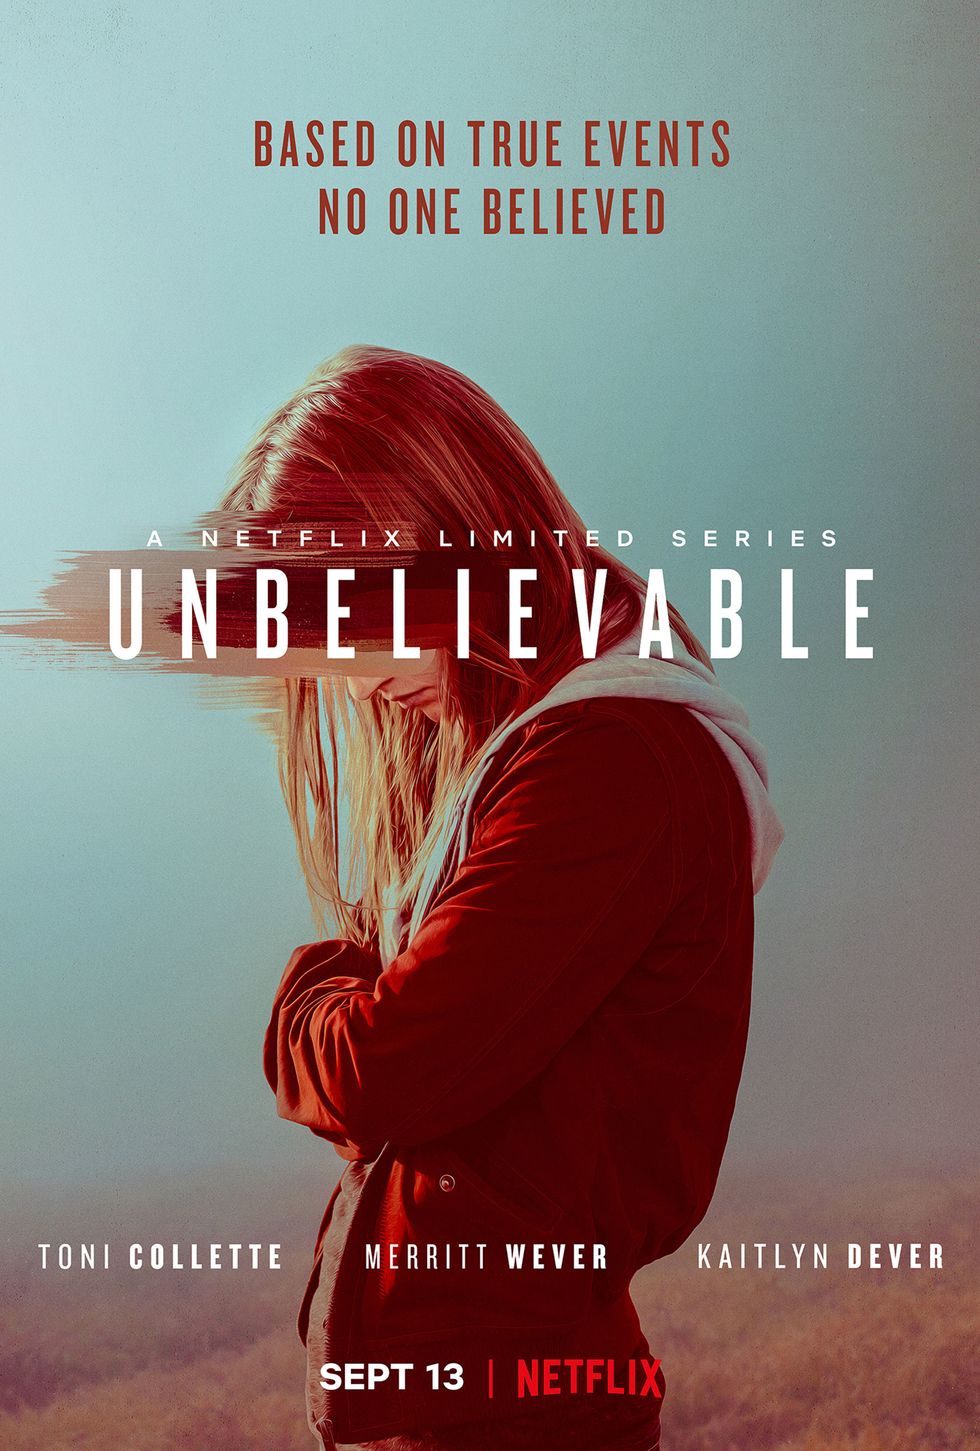 Why Everyone Should Watch 'Unbelievable' on Netflix